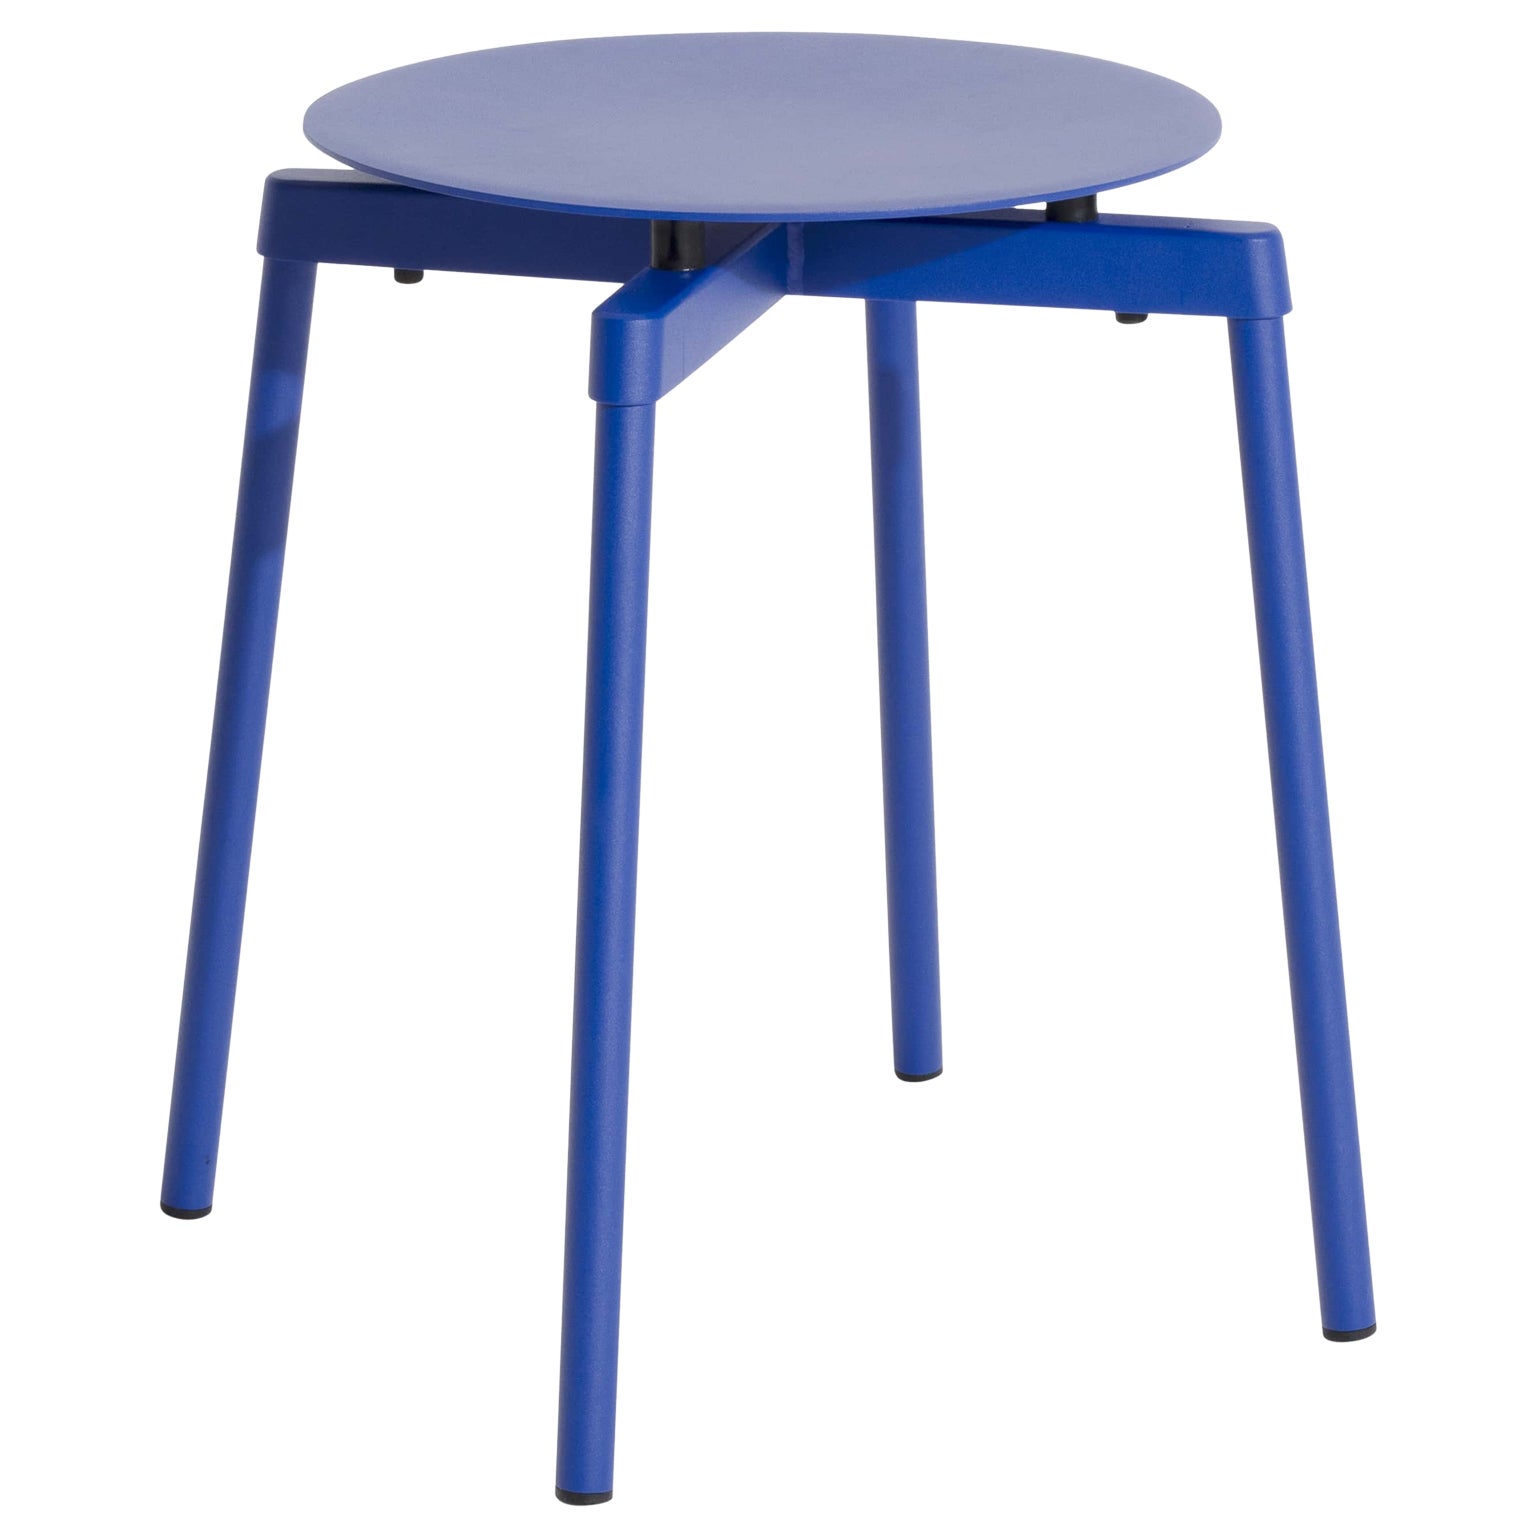 Petite Friture Fromme Stool in Blue Aluminium by Tom Chung, 2020 For Sale